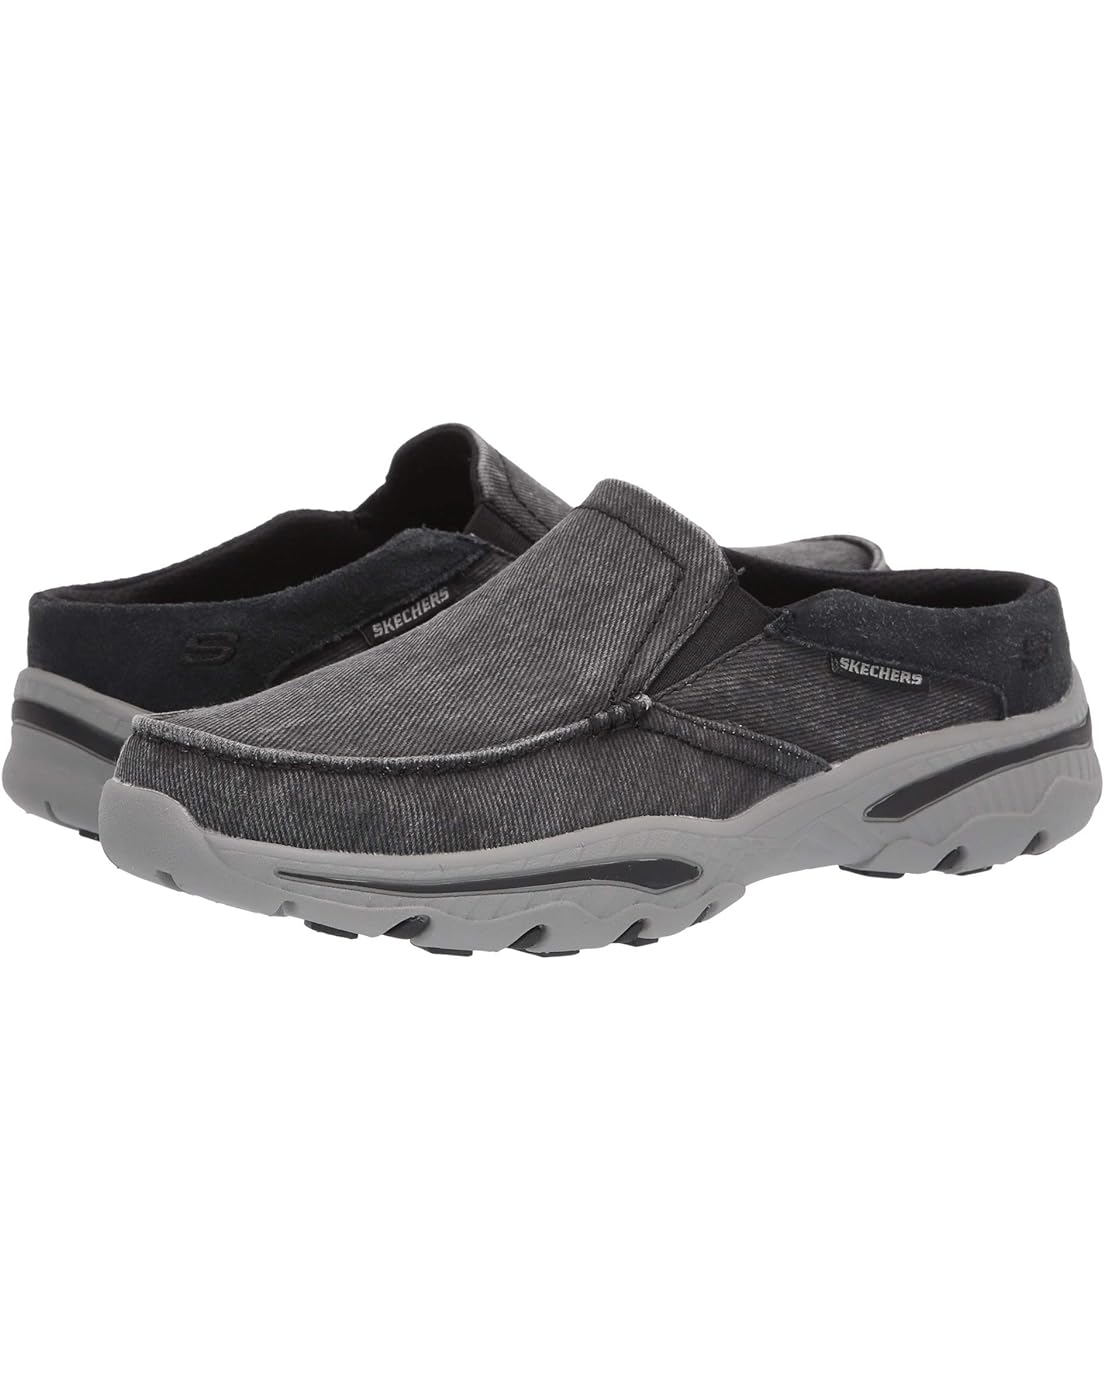 SKECHERS Relaxed Fit Creston - Backlot